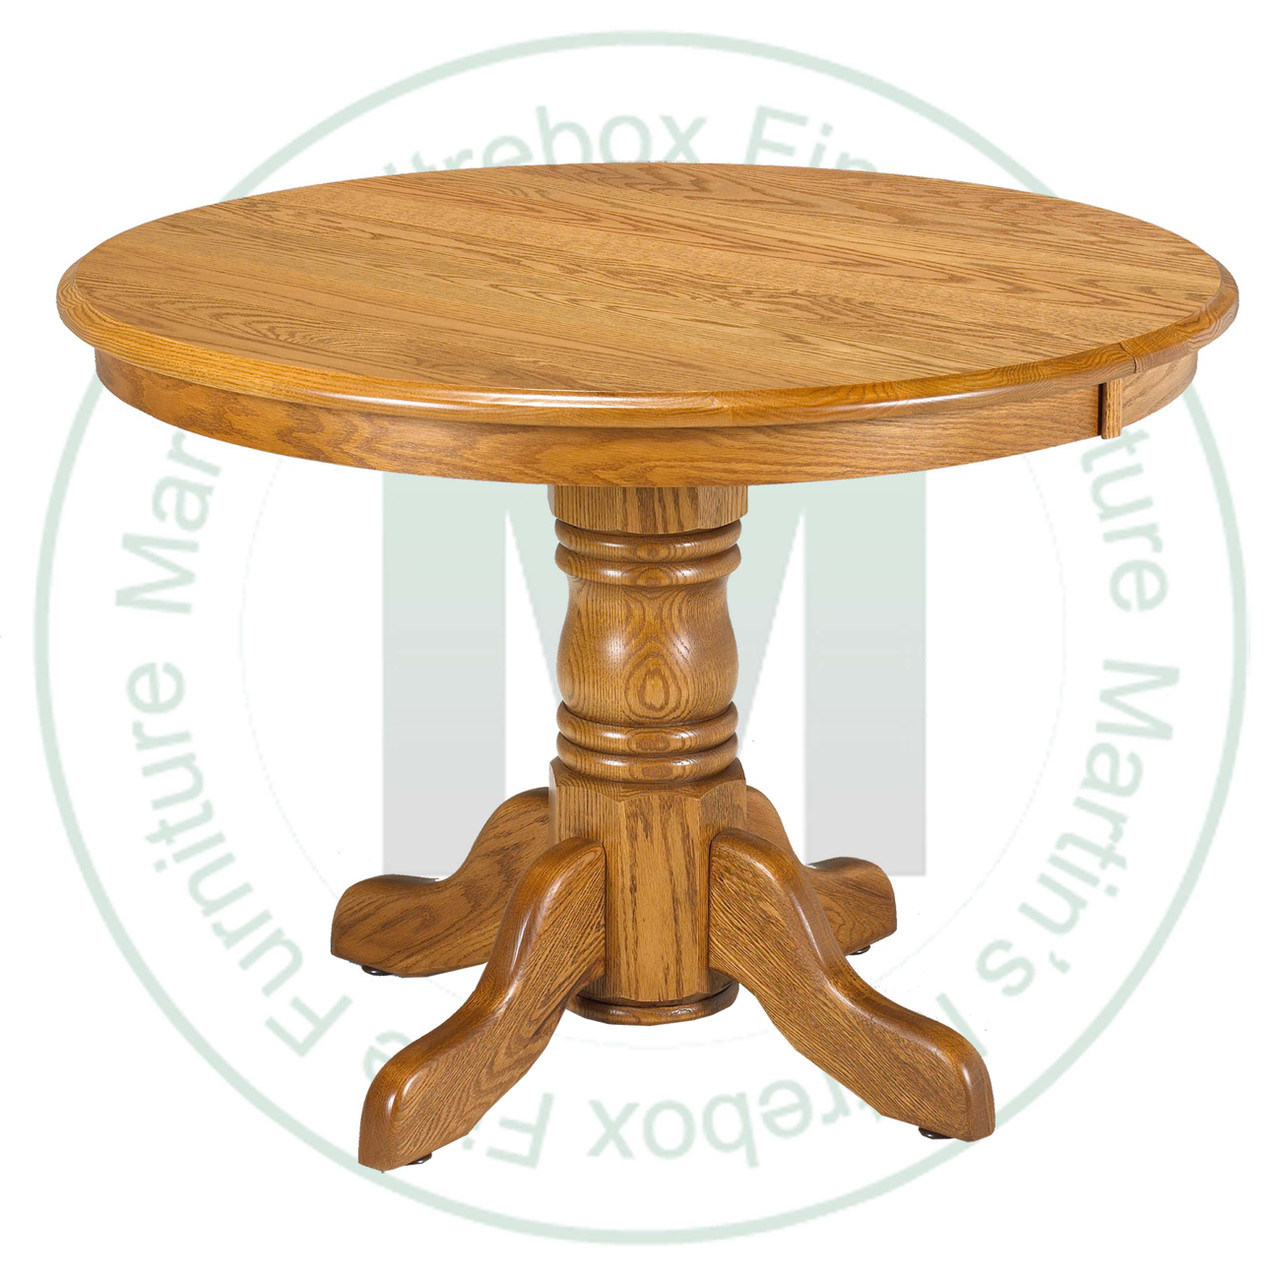 Maple Lancaster Collection Single Pedestal Table 36''D x 54''W x 30''H  Round Solid Table. Table Has 1'' Thick Top